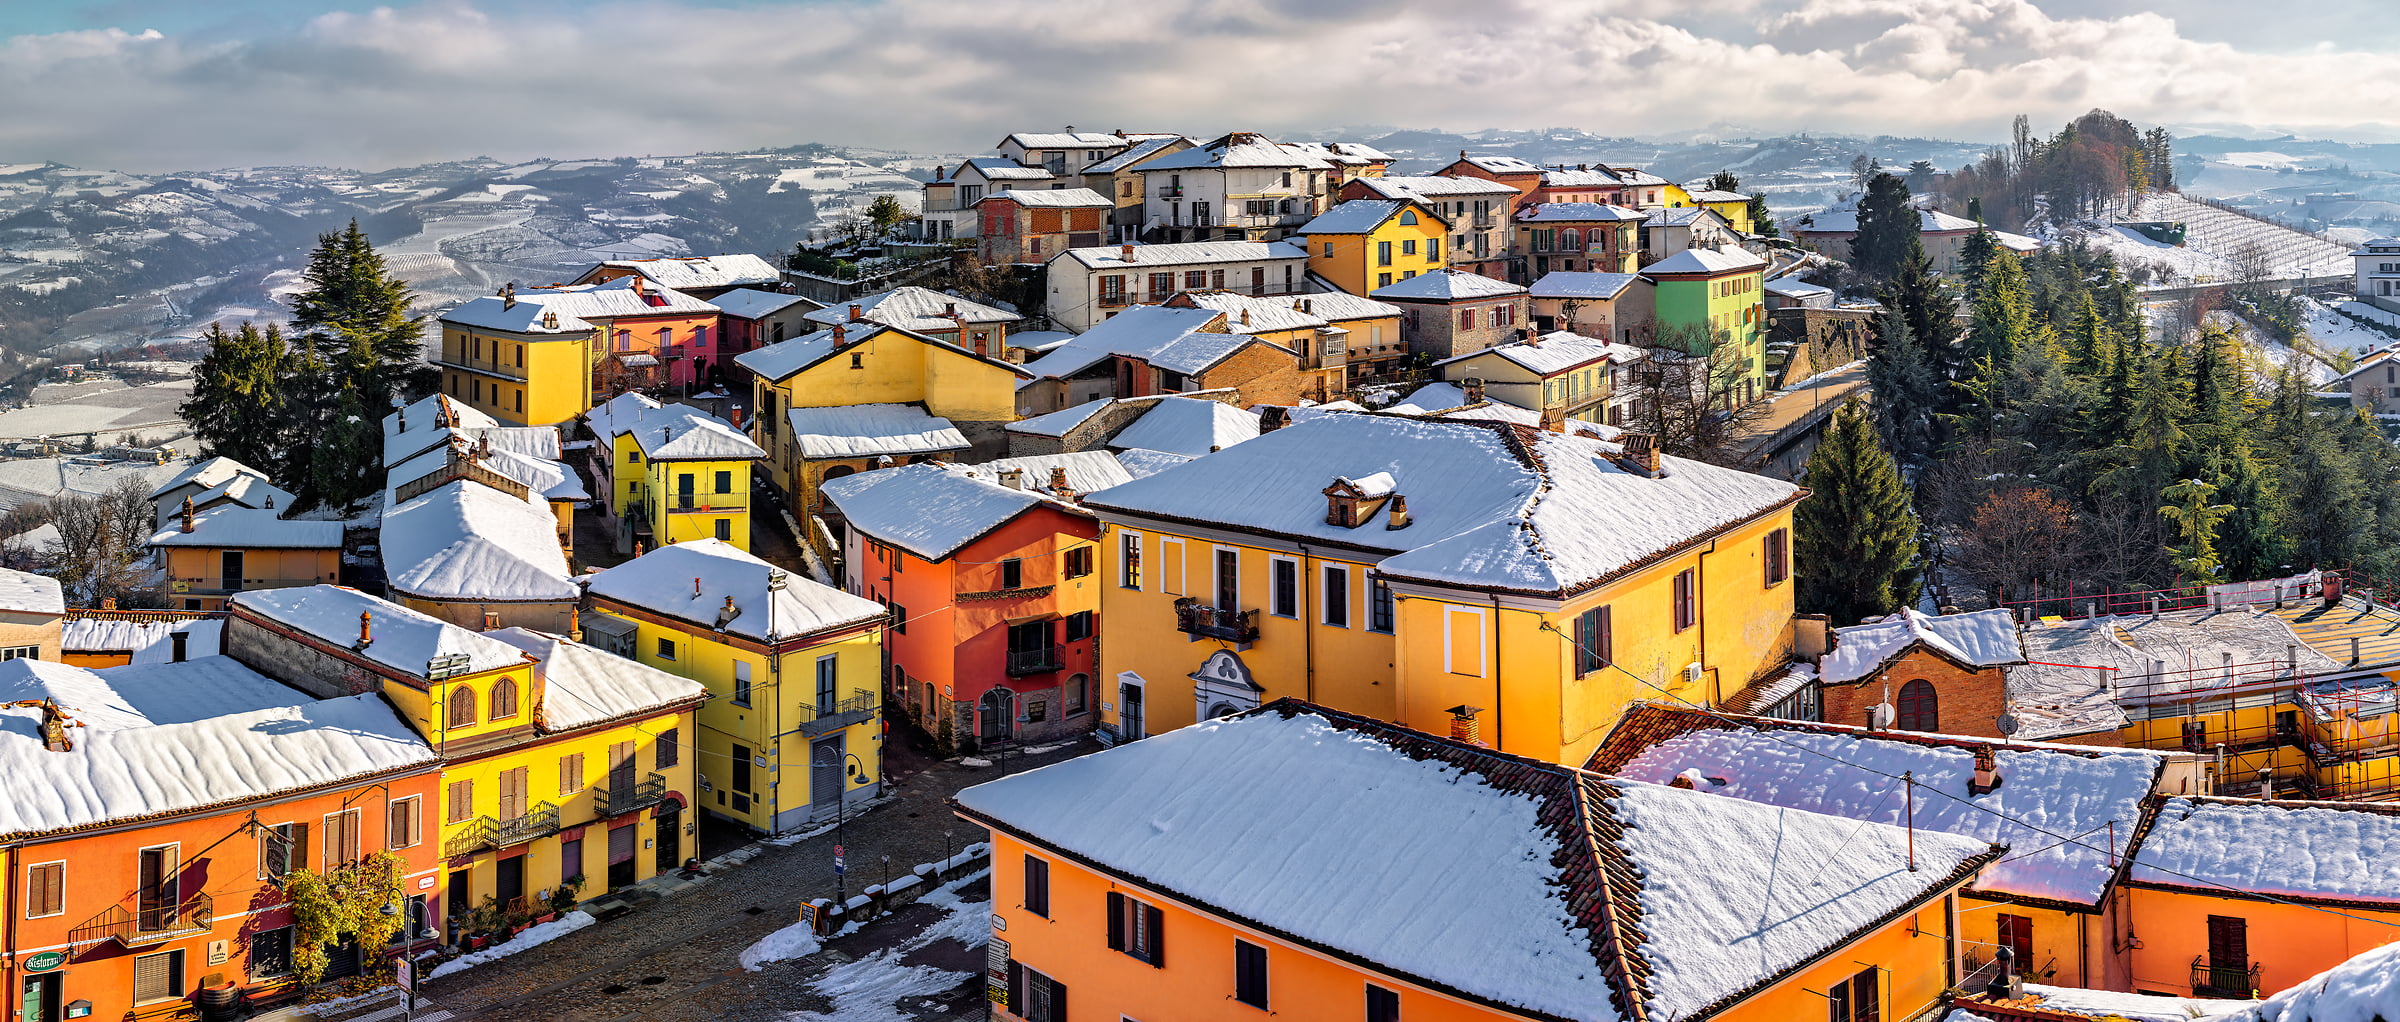 504 megapixels! A very high resolution, large-format VAST photo print of colorful houses in Italy in the snow; landscape photograph created by Duilio Fiorille in Diano D'Alba, Cuneo, Piedmont, Italy